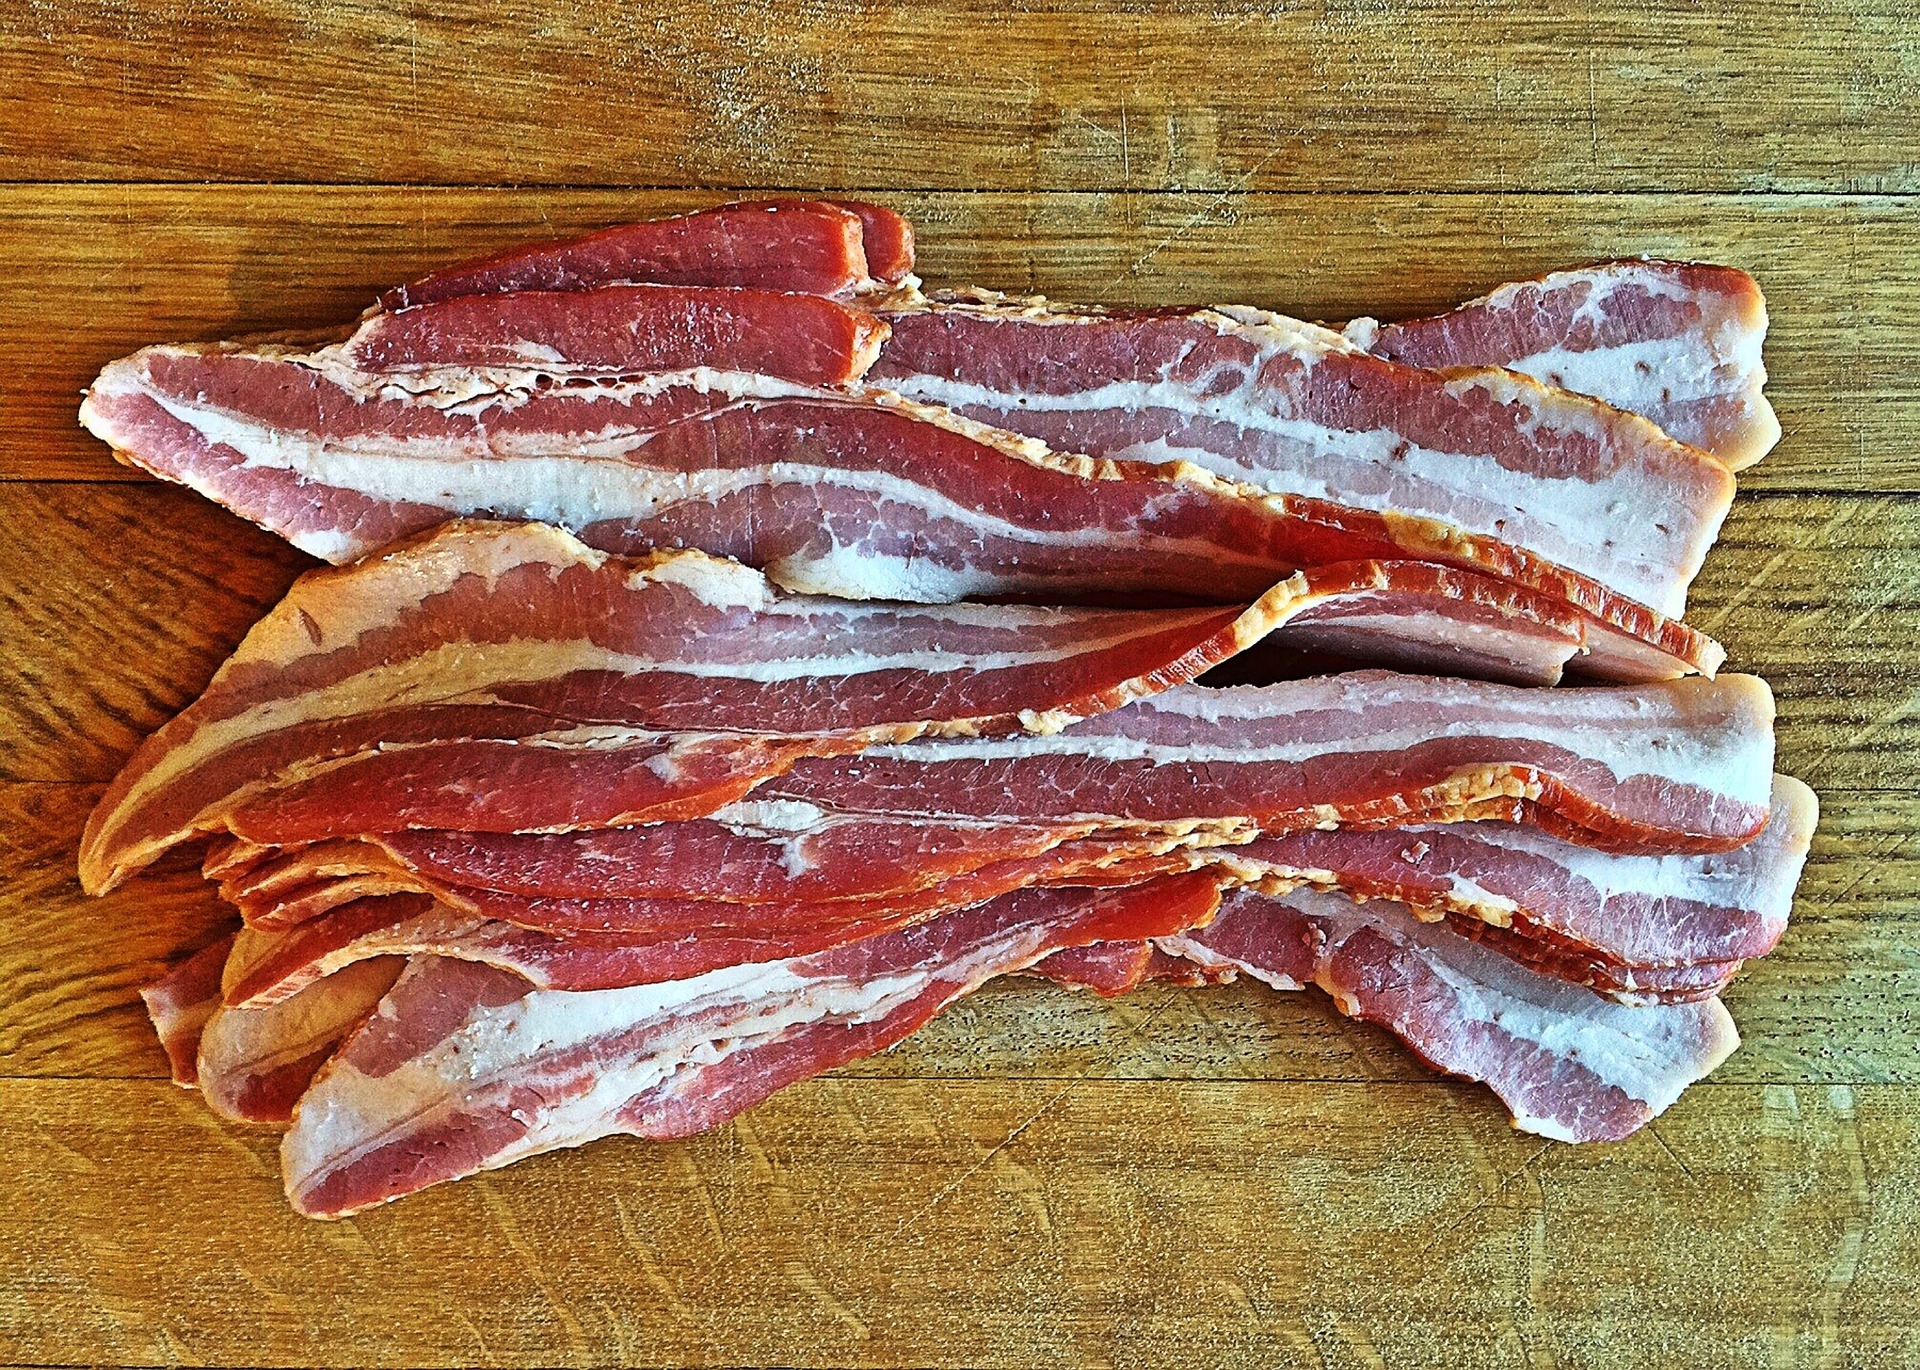 healthiest-runners-diet-for-best-performance-mmm-bacon